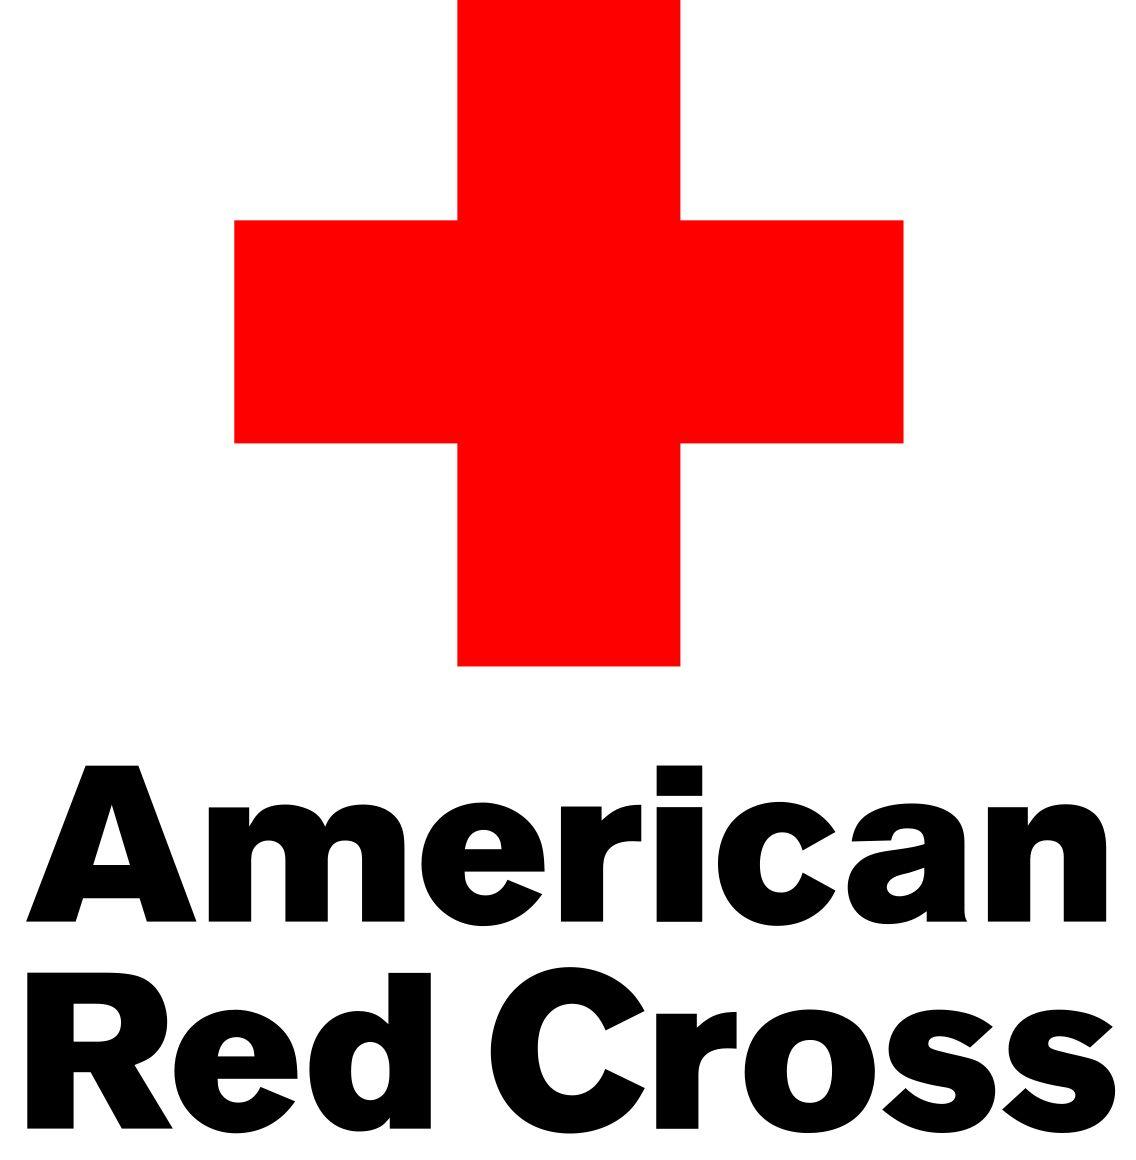 The Cross Logo - American Red Cross Logo, American Red Cross Symbol, Meaning, History ...